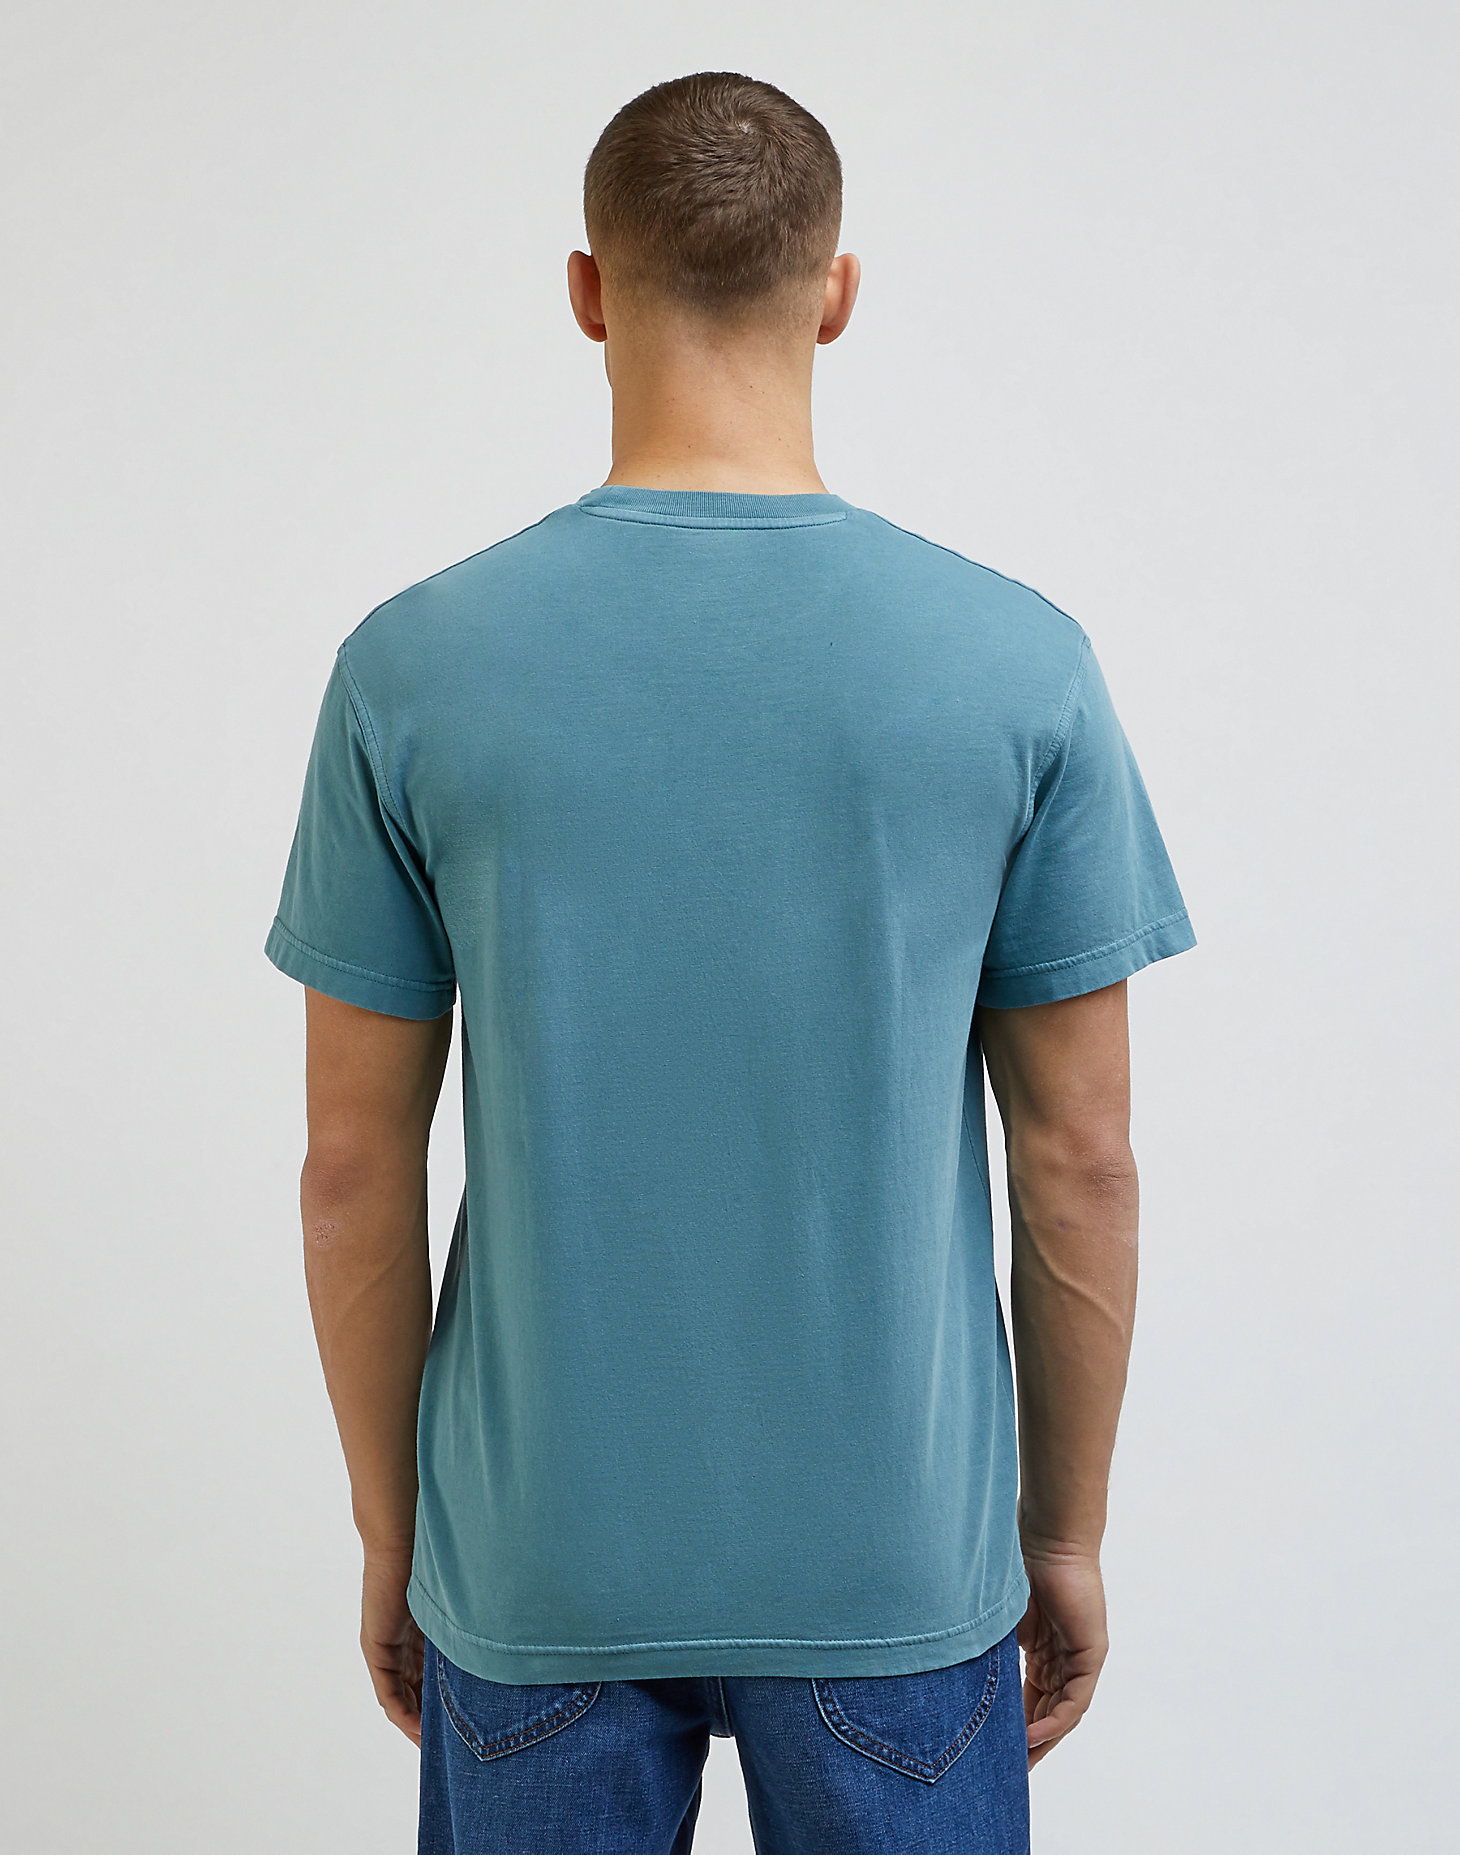 Relaxed Pocket Tee in Eden alternative view 1